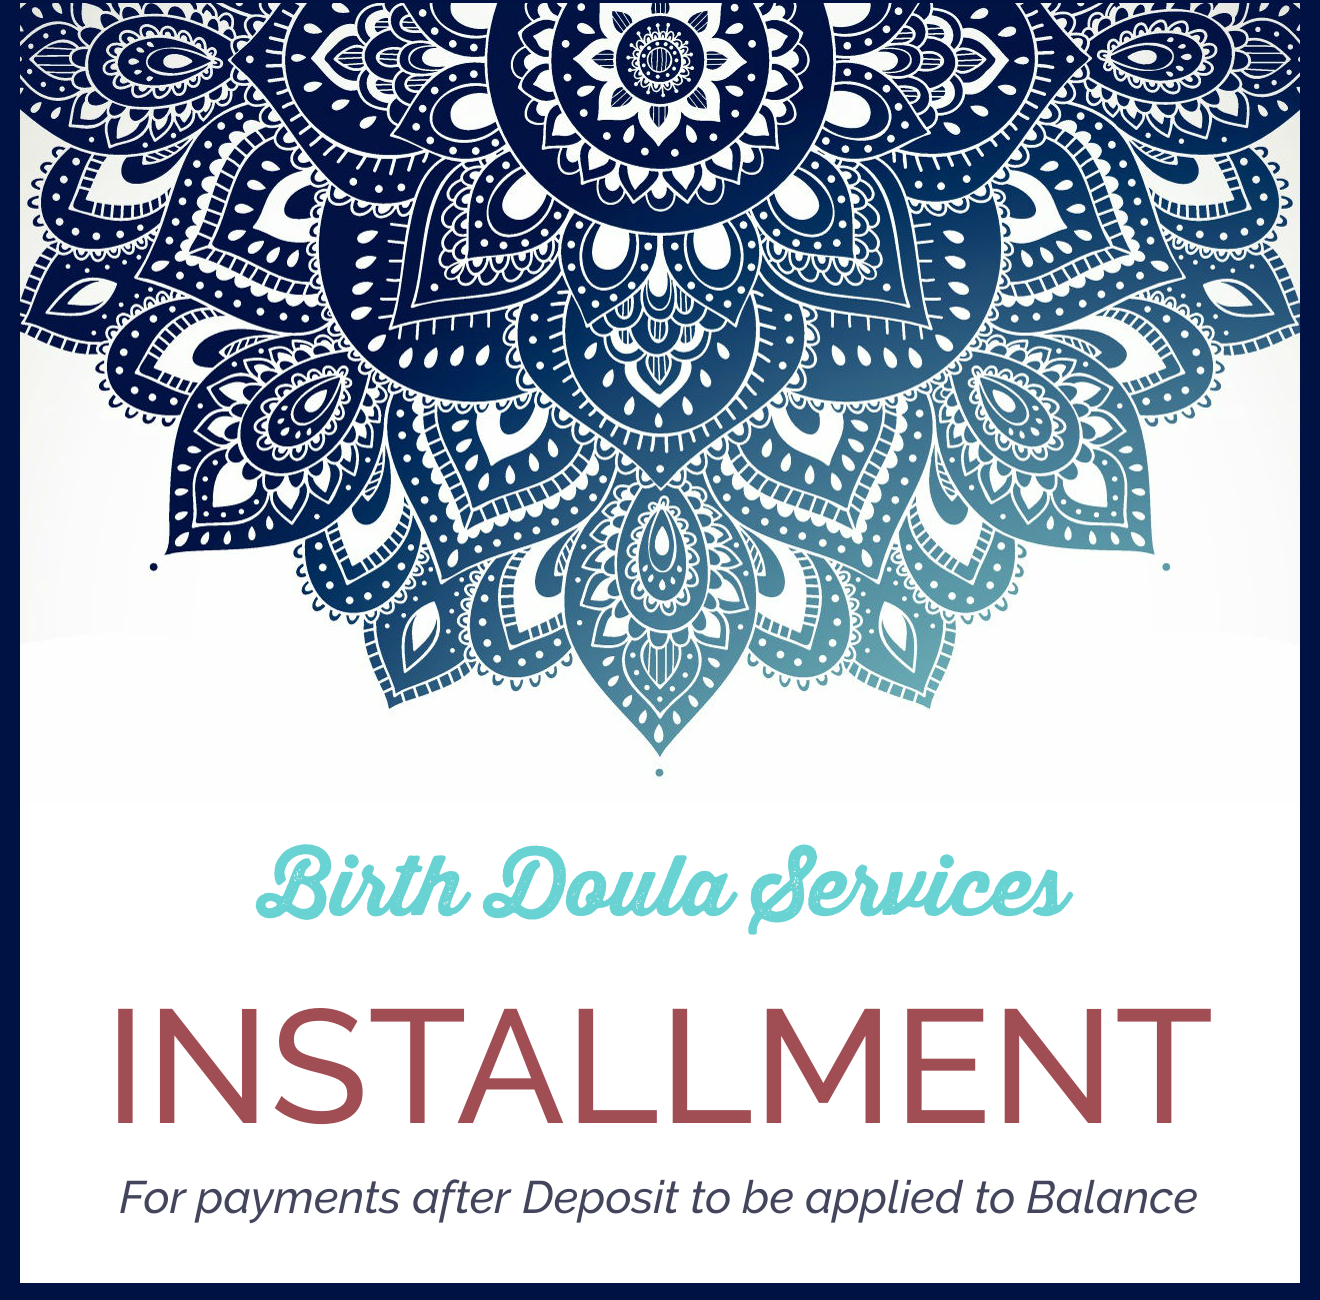 Installment Payment for Birth Doula Services